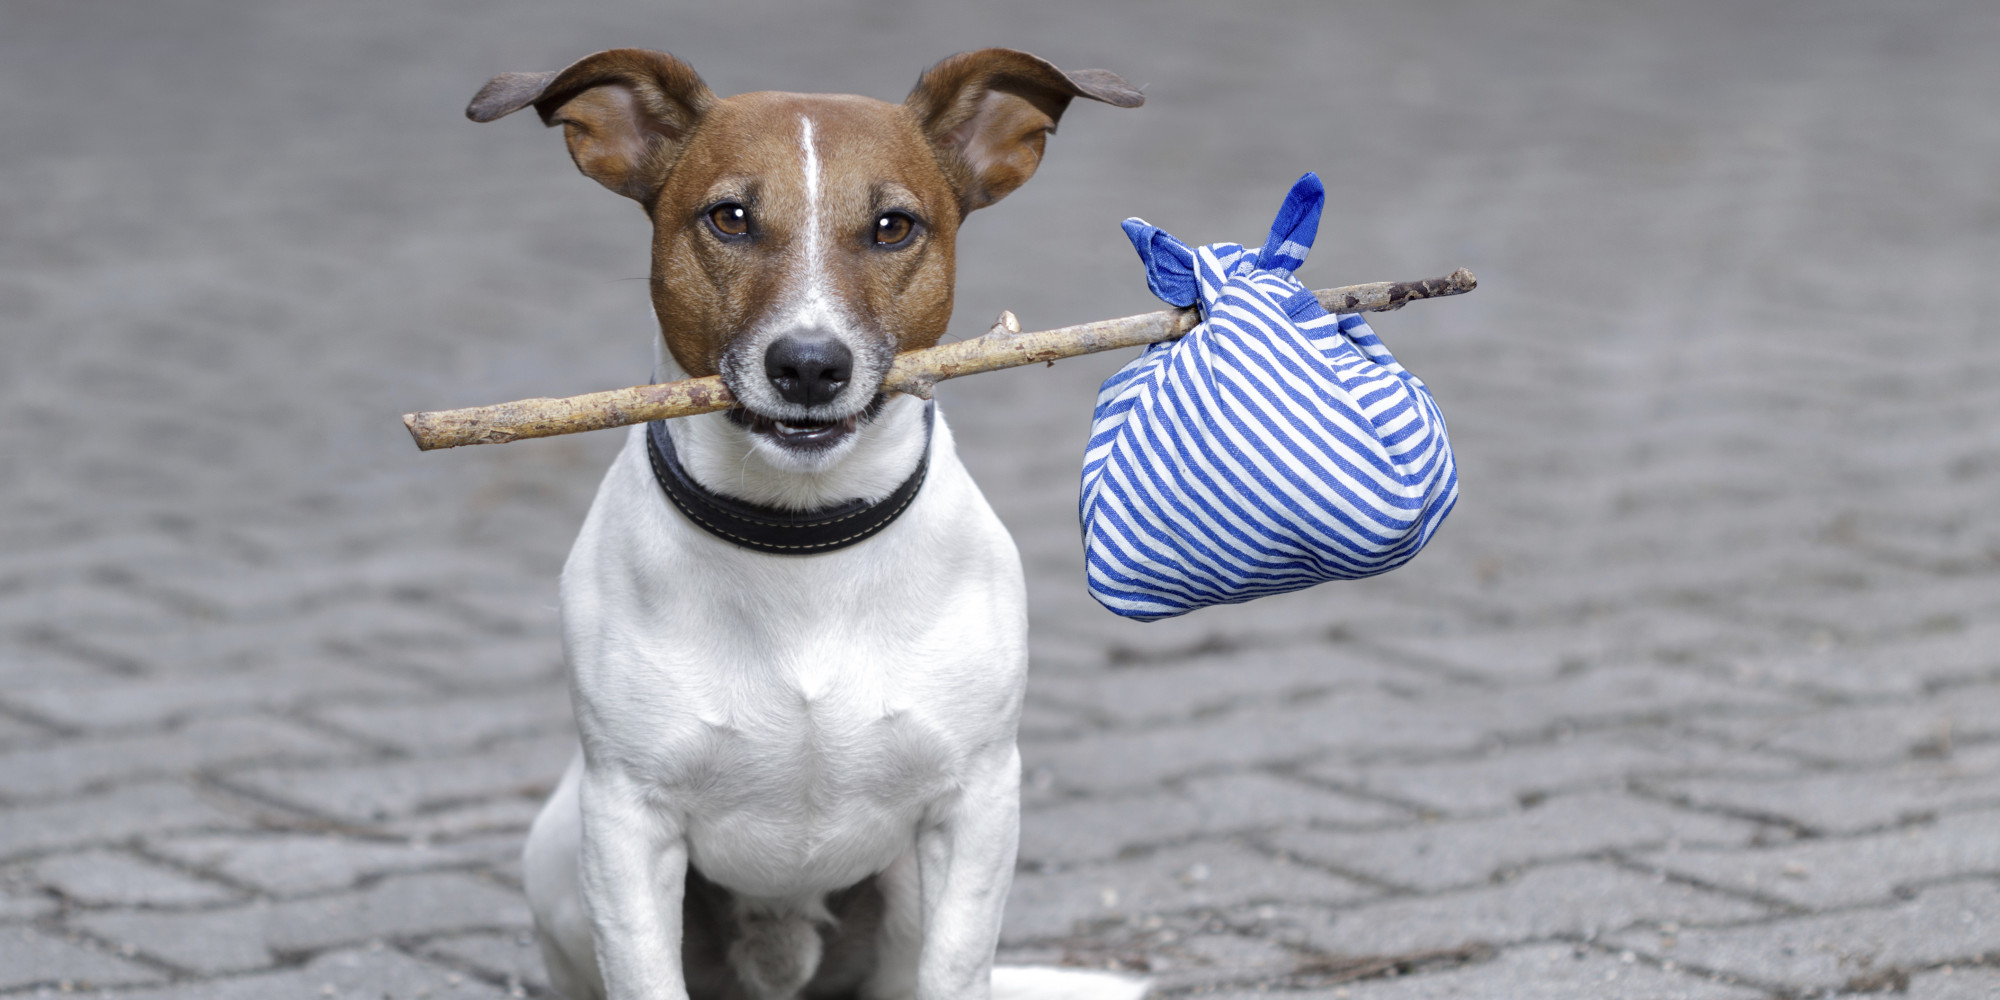 Single in the City and Want a Dog? 10 Things to Consider Before Taking the Plunge